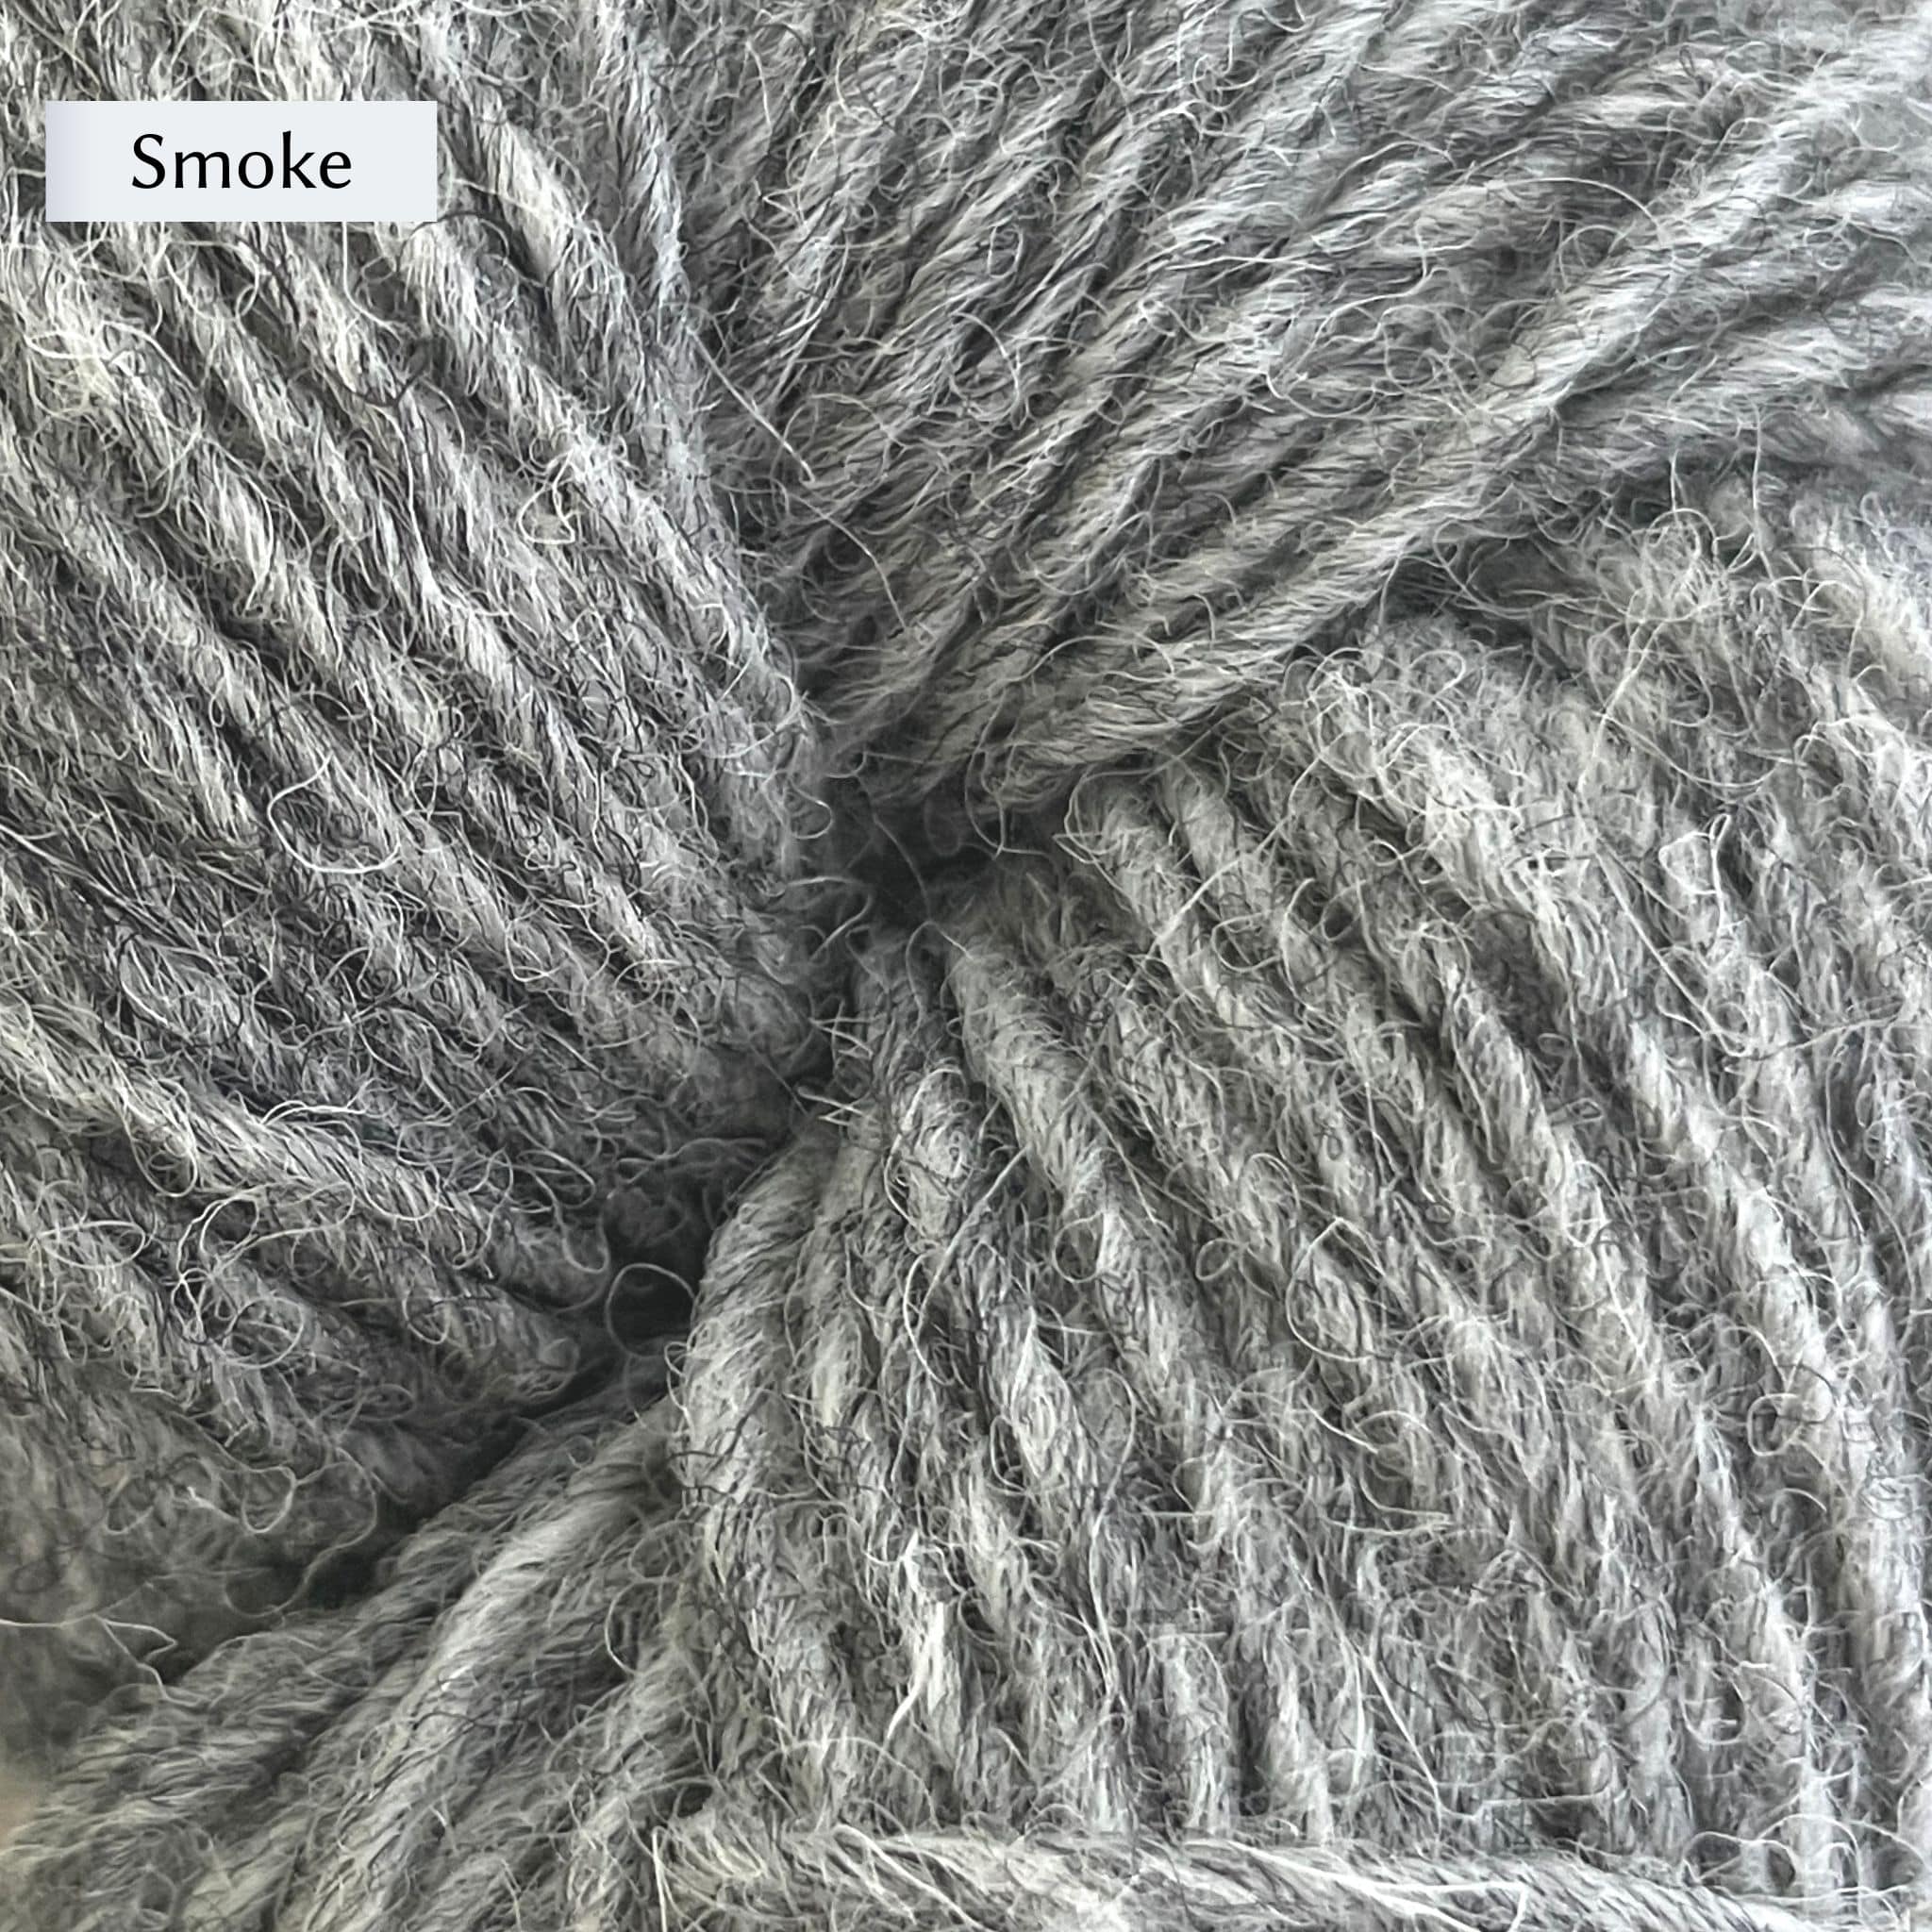 Lichen & Lace Rustic Heather Sport, a sport weight single-ply yarn, in color Smoke, a light heathered grey